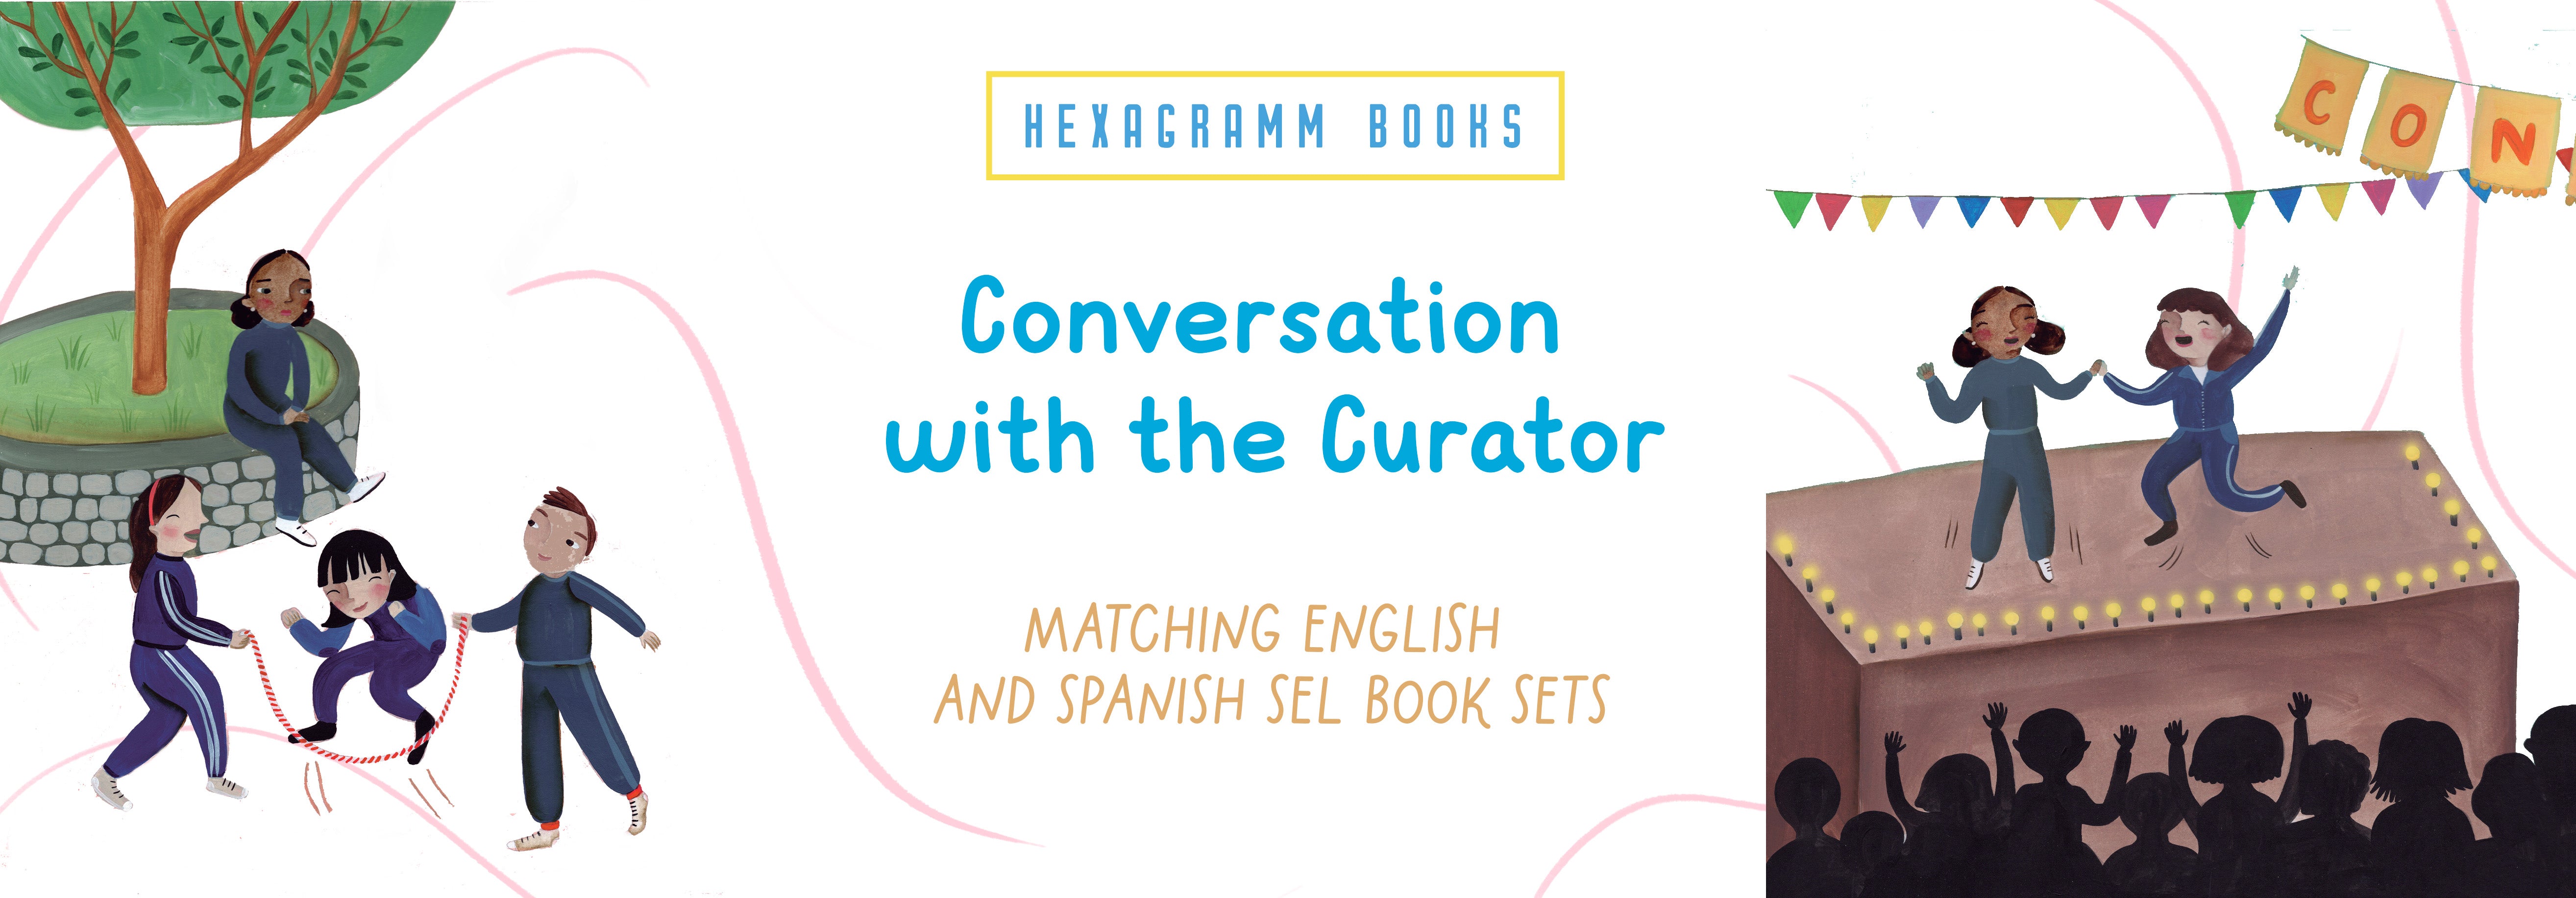 Matching English and Spanish SEL Book Sets